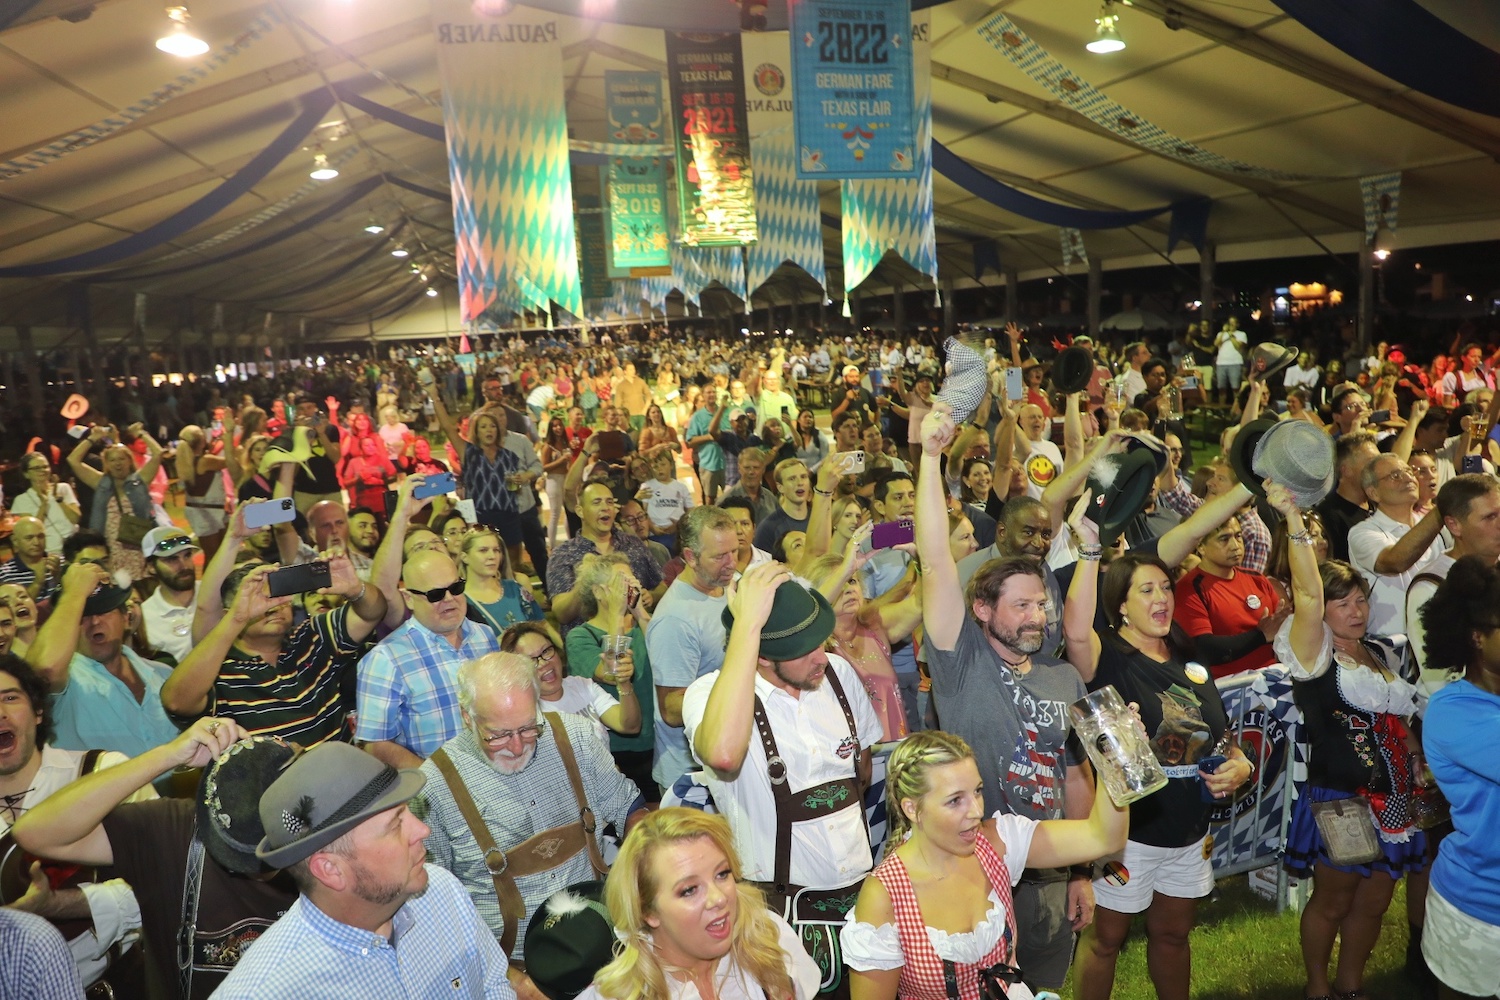 Crowd of people dressed up for Oktoberfest